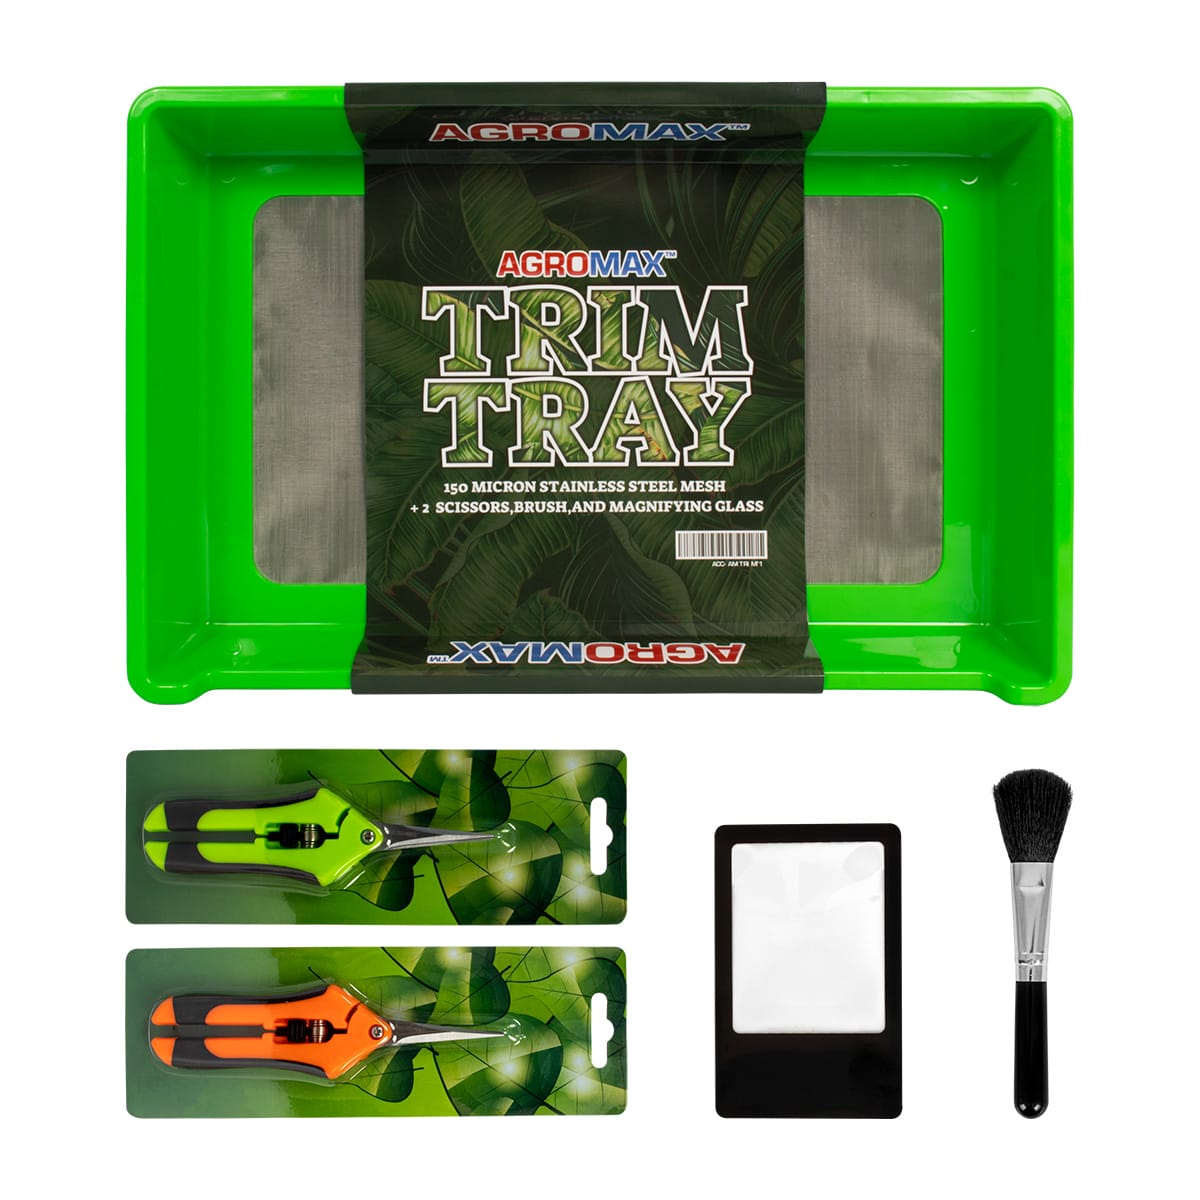 Plant Germination Trays Plant Trim Tray 2 Sets of White and Black+2 Gardening scissors+1 Brush+1 Large Card